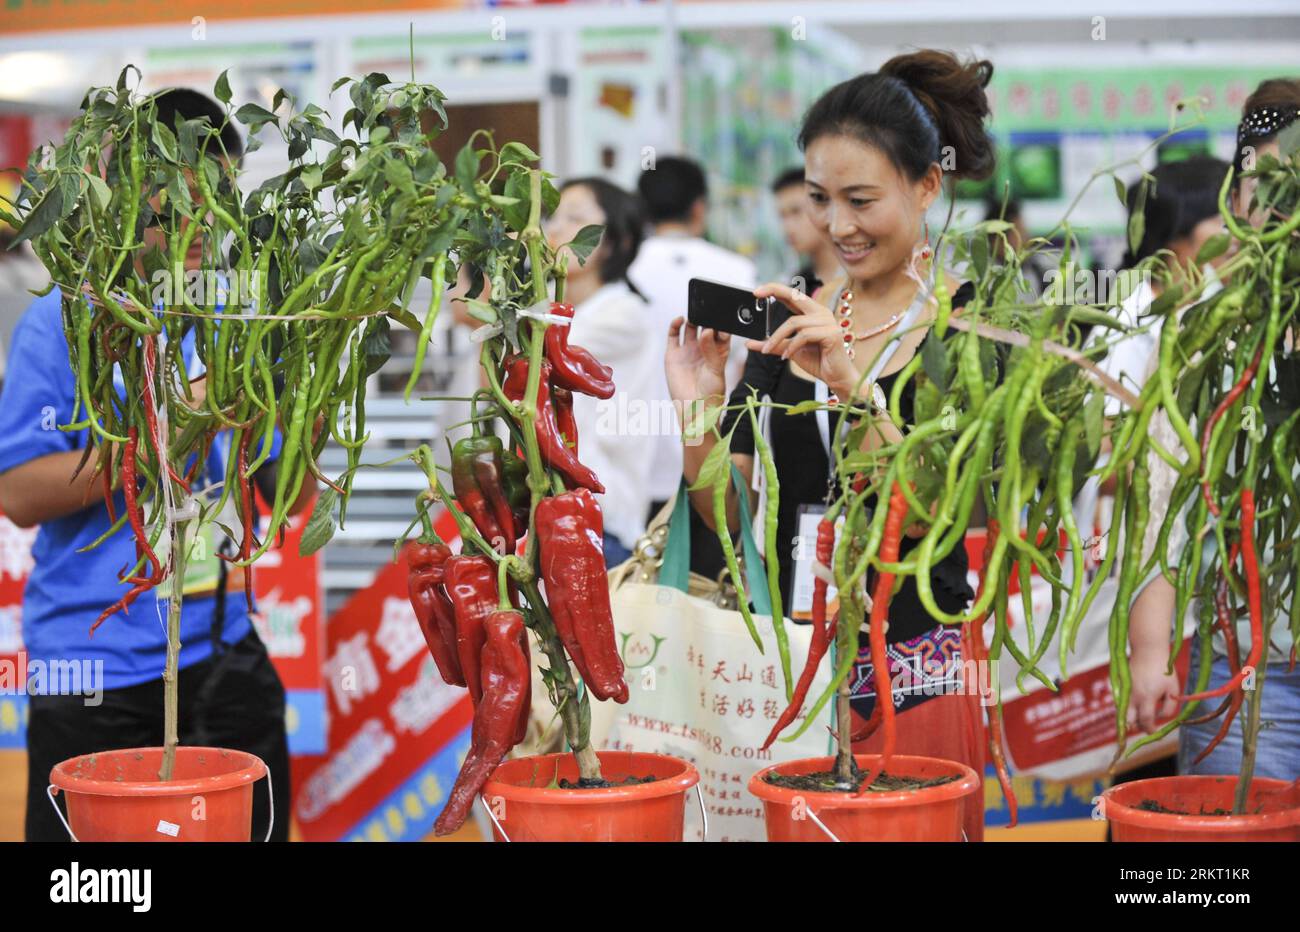 Bildnummer: 58348684  Datum: 14.08.2012  Copyright: imago/Xinhua (120814) -- URUMQI, Aug. 14, 2012 (Xinhua) -- A woman takes pictures of new breed of hot pepper at the 12th Xinjiang International Agriculture Fair in Urumqi, capital of northwest China s Xinjiang Uygur Autonomous Region, Aug. 14, 2012. The Fair, which kicked off on Tuesday, will last until Aug. 16. (Xinhua/Jiang Wenyao) (wjq) CHINA-XINJIANG-URUMQI-AGRICULTURE FAIR (CN) PUBLICATIONxNOTxINxCHN Wirtschaft Landwirtschaft Messe Landwirtschaftsmesse Paprika xbs x0x 2012 quer      58348684 Date 14 08 2012 Copyright Imago XINHUA  Urumqi Stock Photo